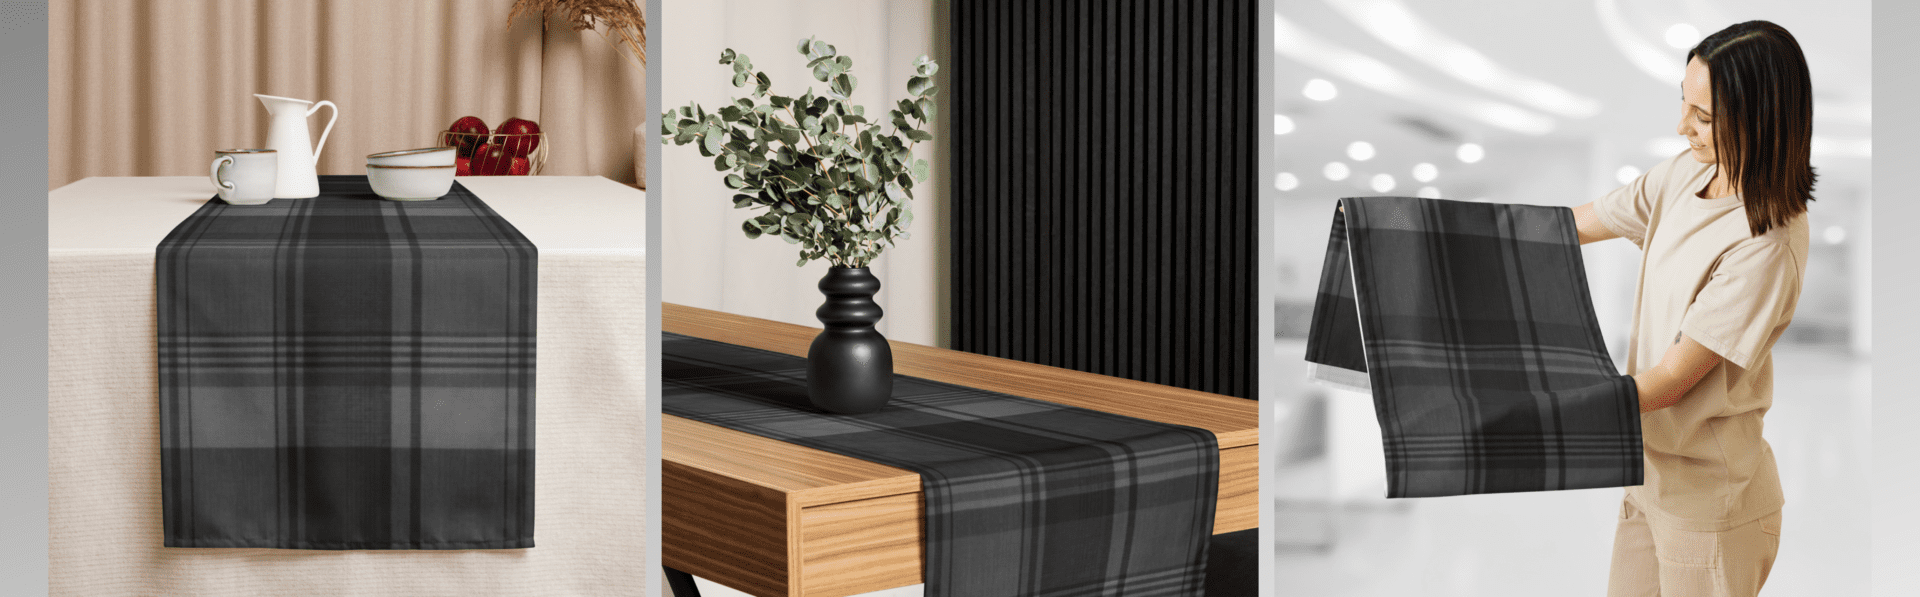 Black and gray plaid table runner.